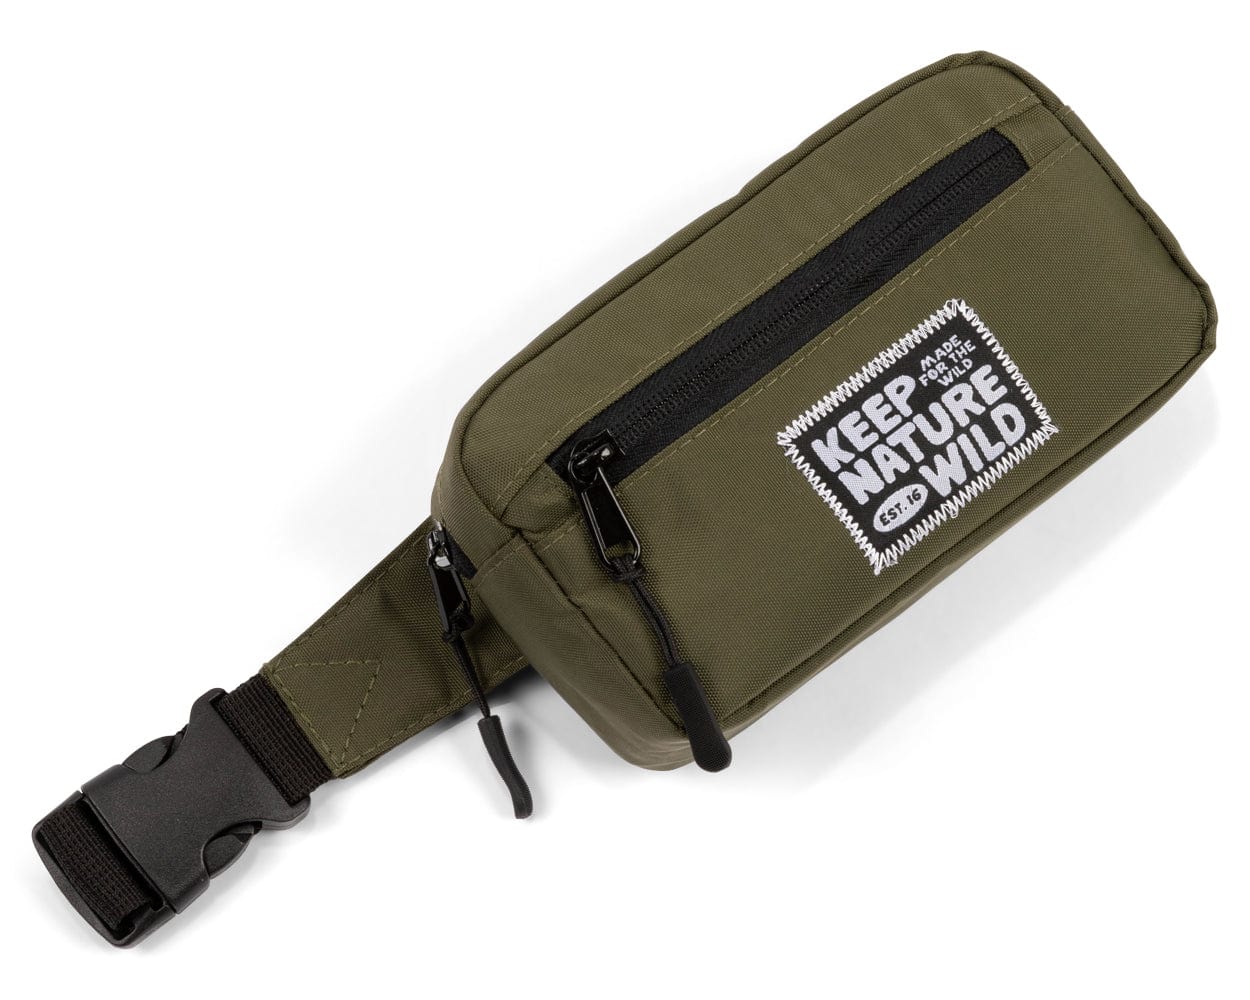 Keep Nature Wild Fanny Pack Match Your Mini KNW Fanny Pack Bundle | Olive